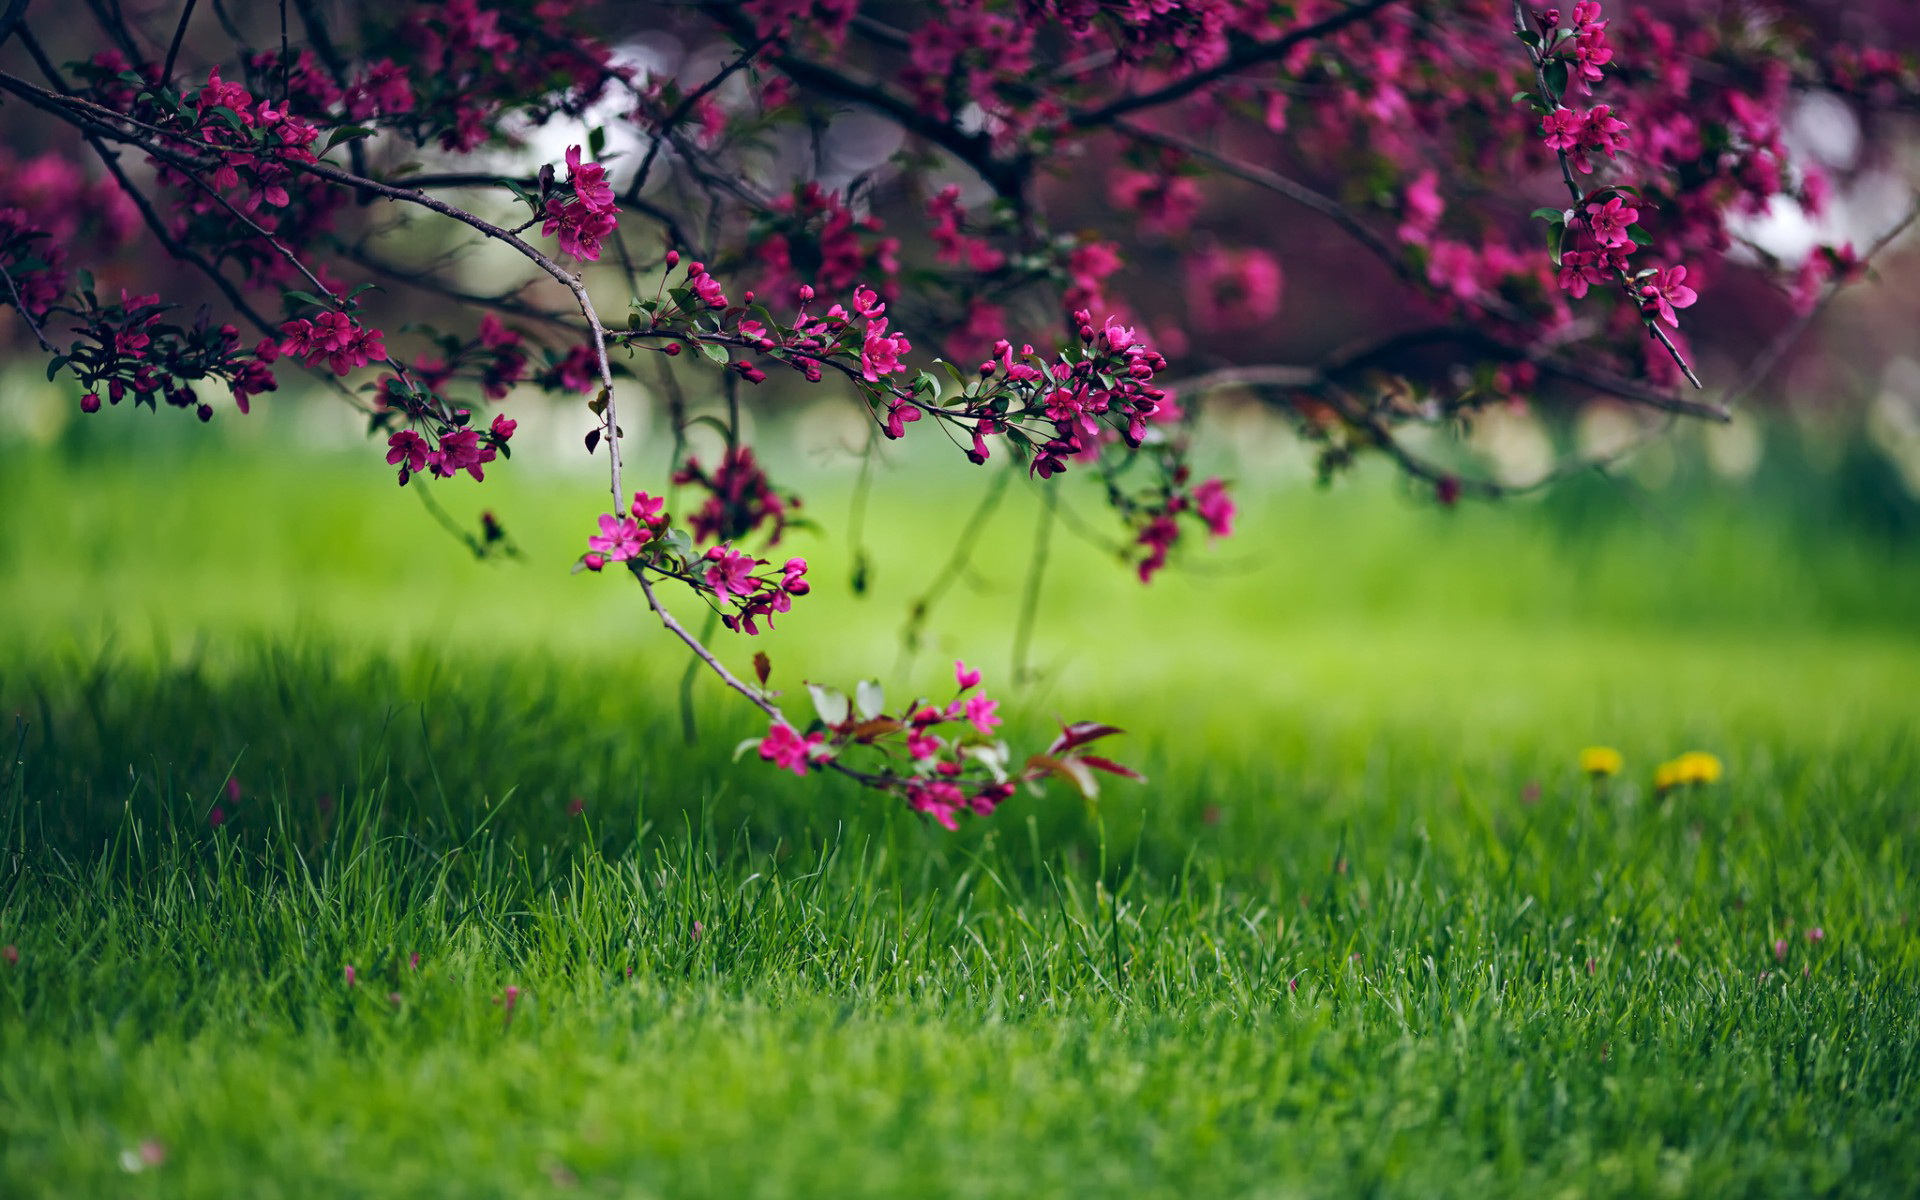 Earth Blossom HD Wallpaper | Background Image